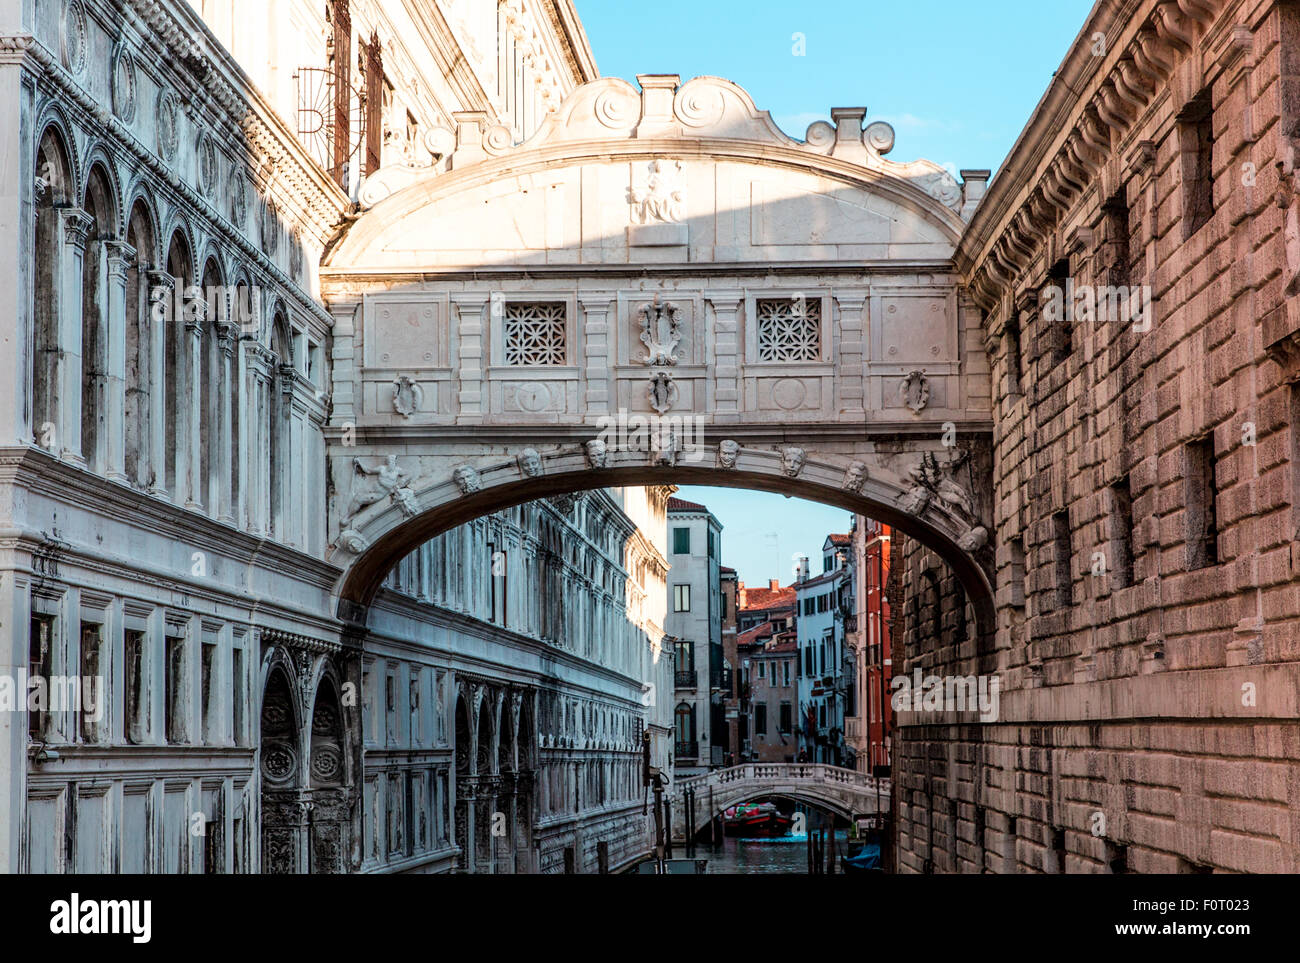 The famous bridge of sighs in Venice, Italy on a February morning during the annual carnival Stock Photo